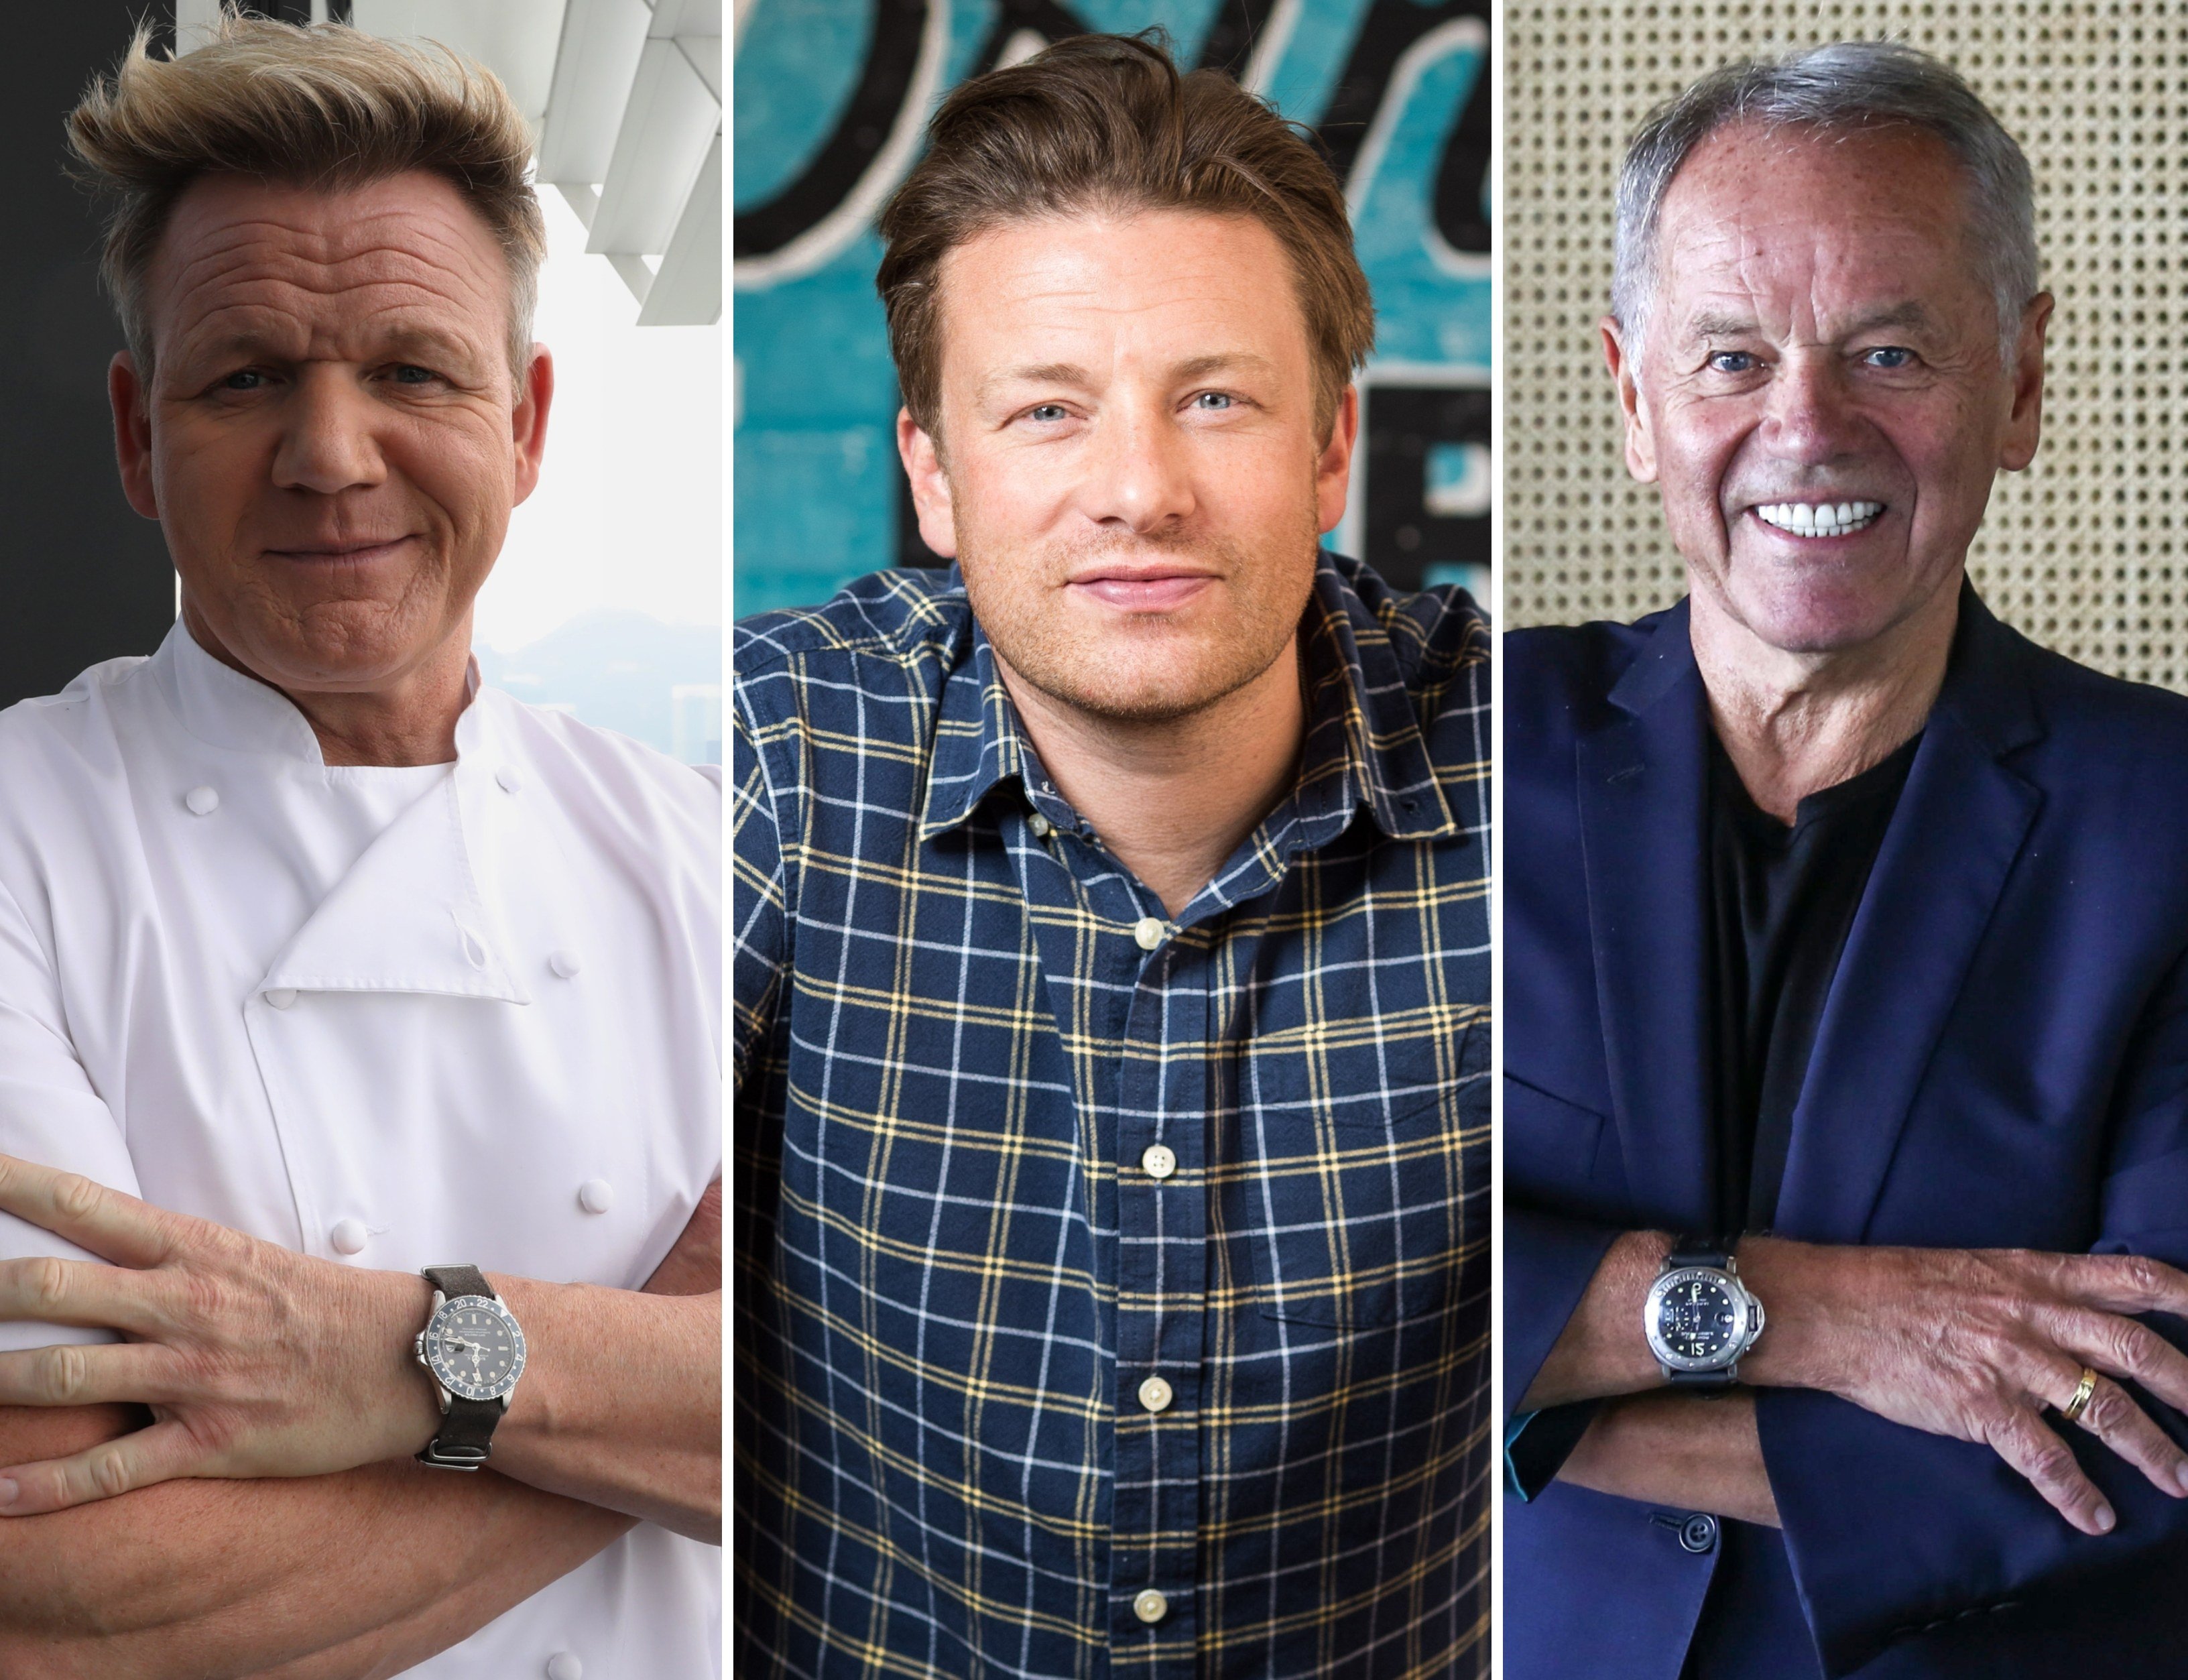 Gordon Ramsay, Jamie Oliver and Wolfgang Puck are among some of the richest celebrity chefs in the world. Photos: SCMP Archive